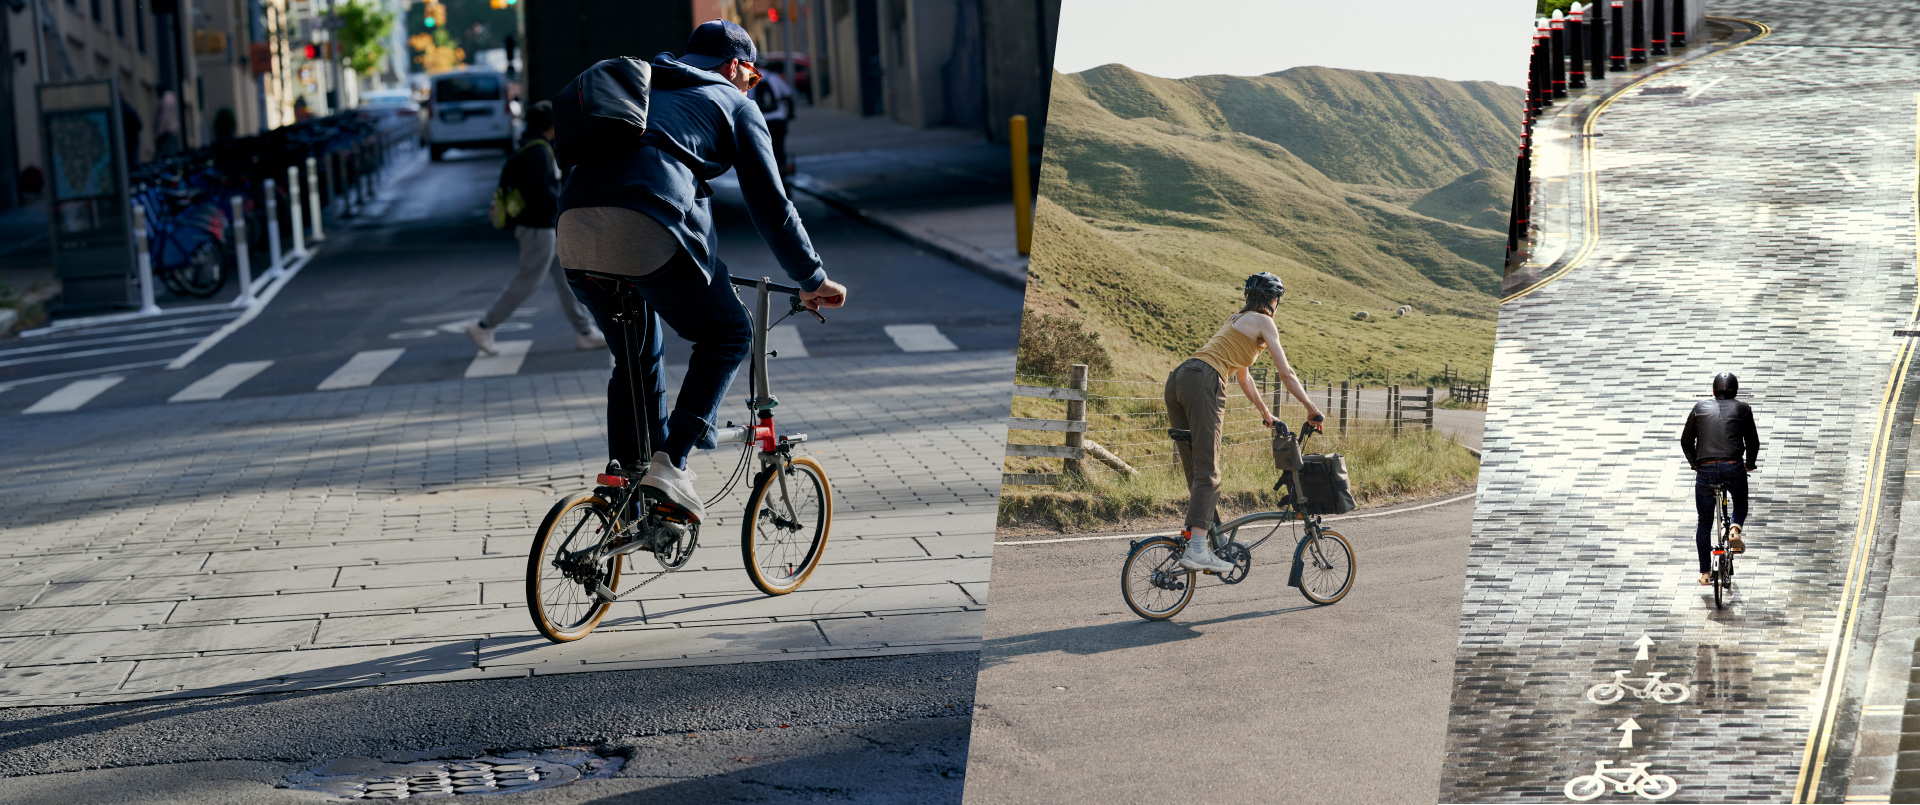 collage showing 3 different scenes where person is riding a brompton